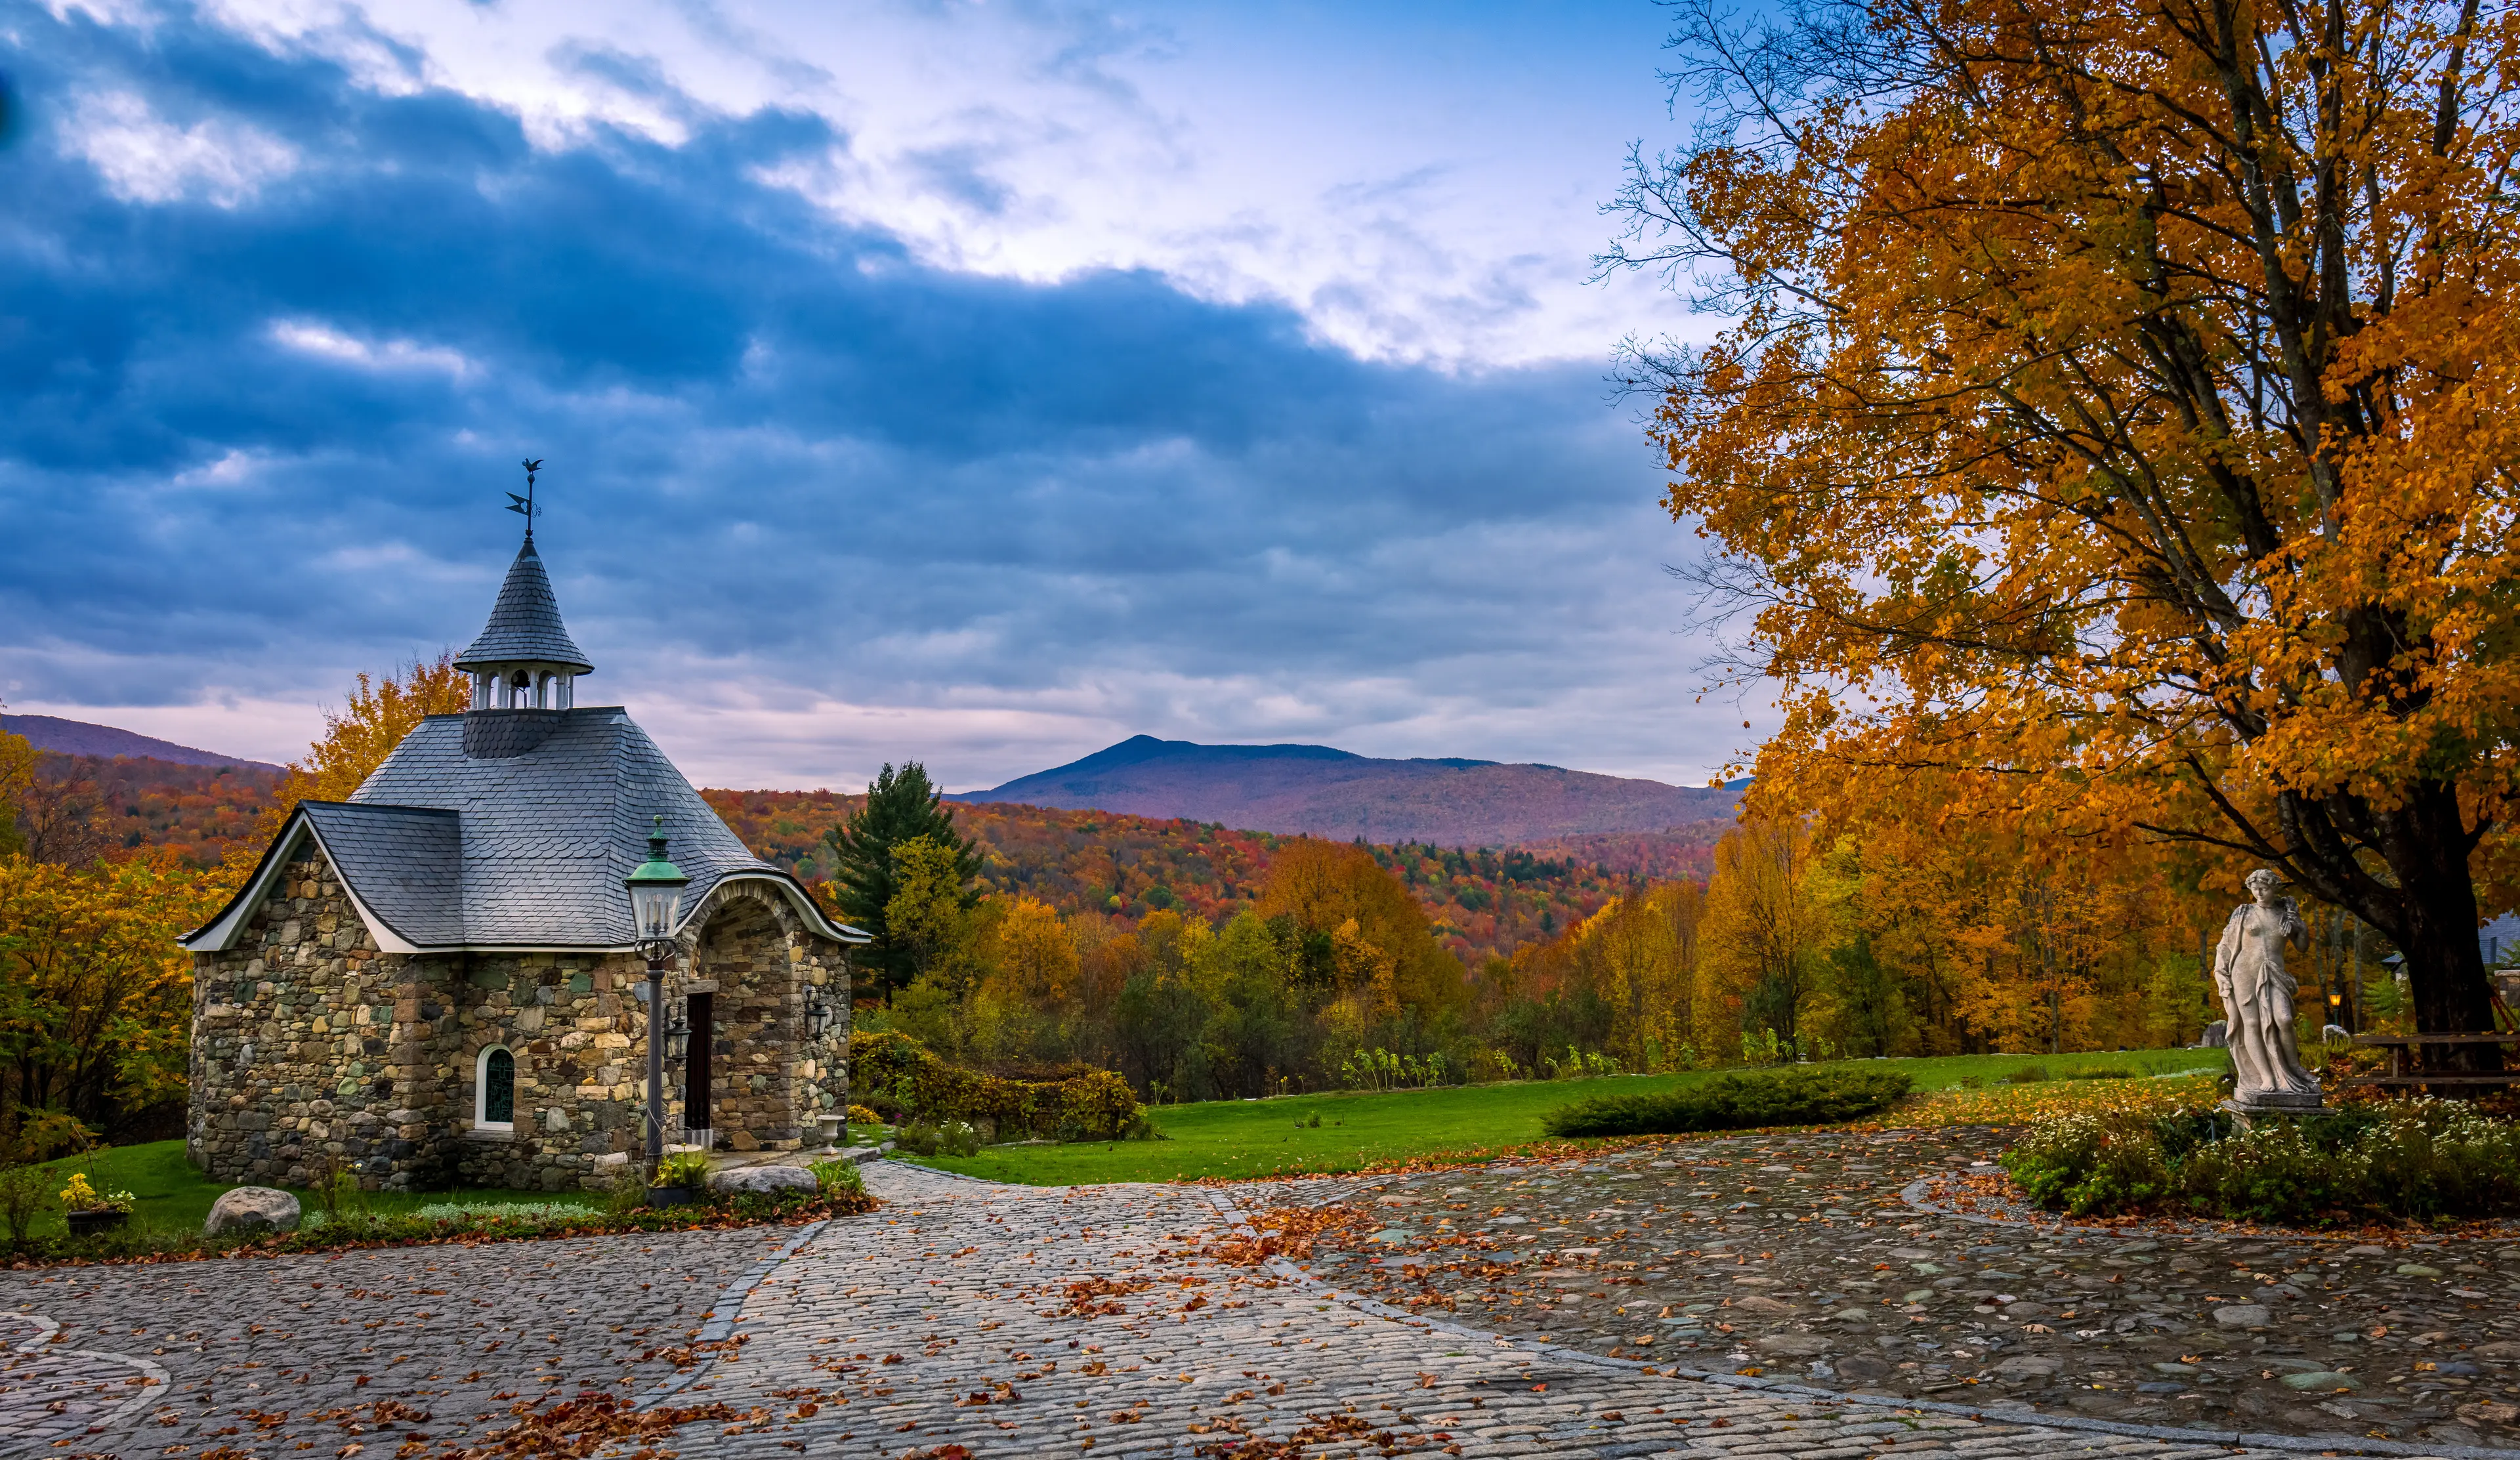 2-Day Explorer's Guide to Eastern Townships, Quebec